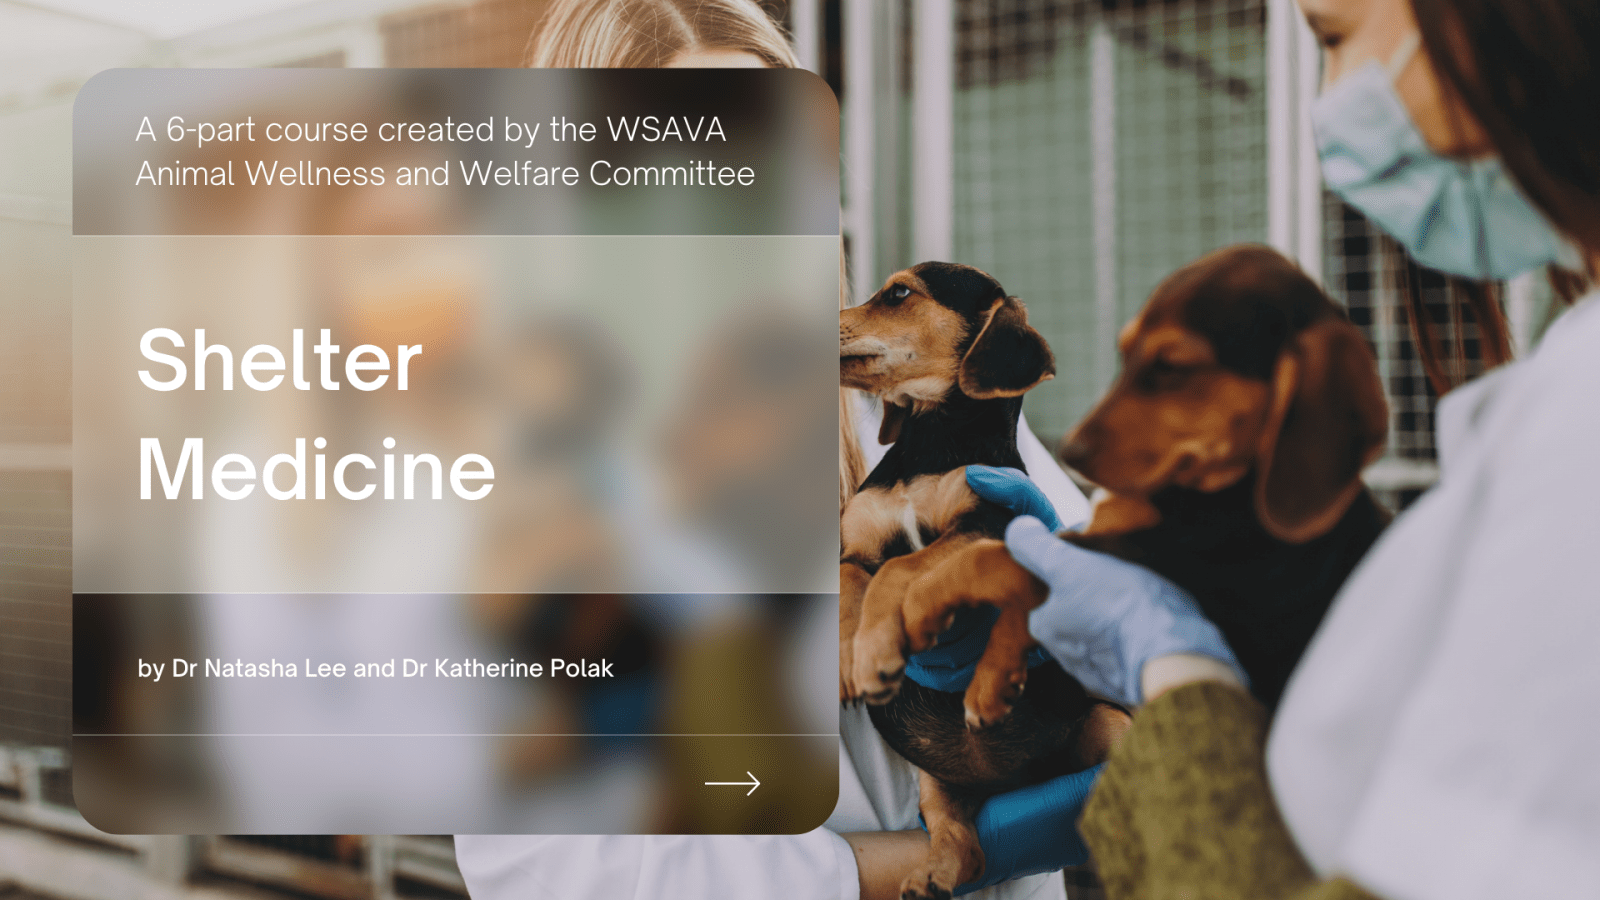 Pioneering the principles of Shelter Medicine around the world